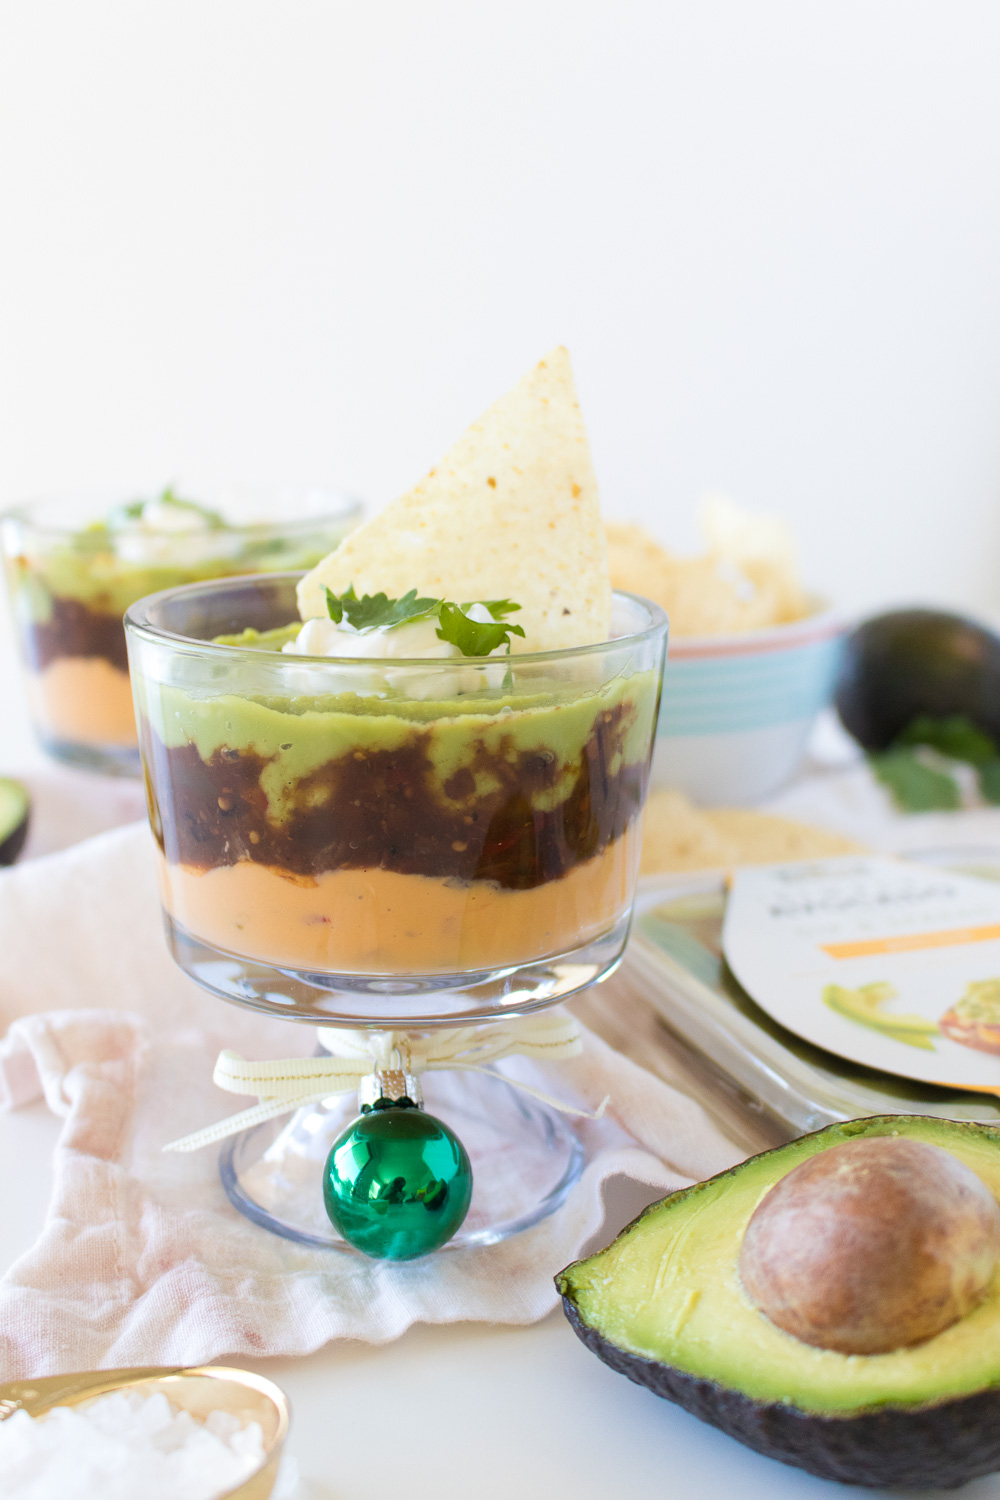 Simple Layered Dip Cups for Holiday Entertaining | Club Crafted